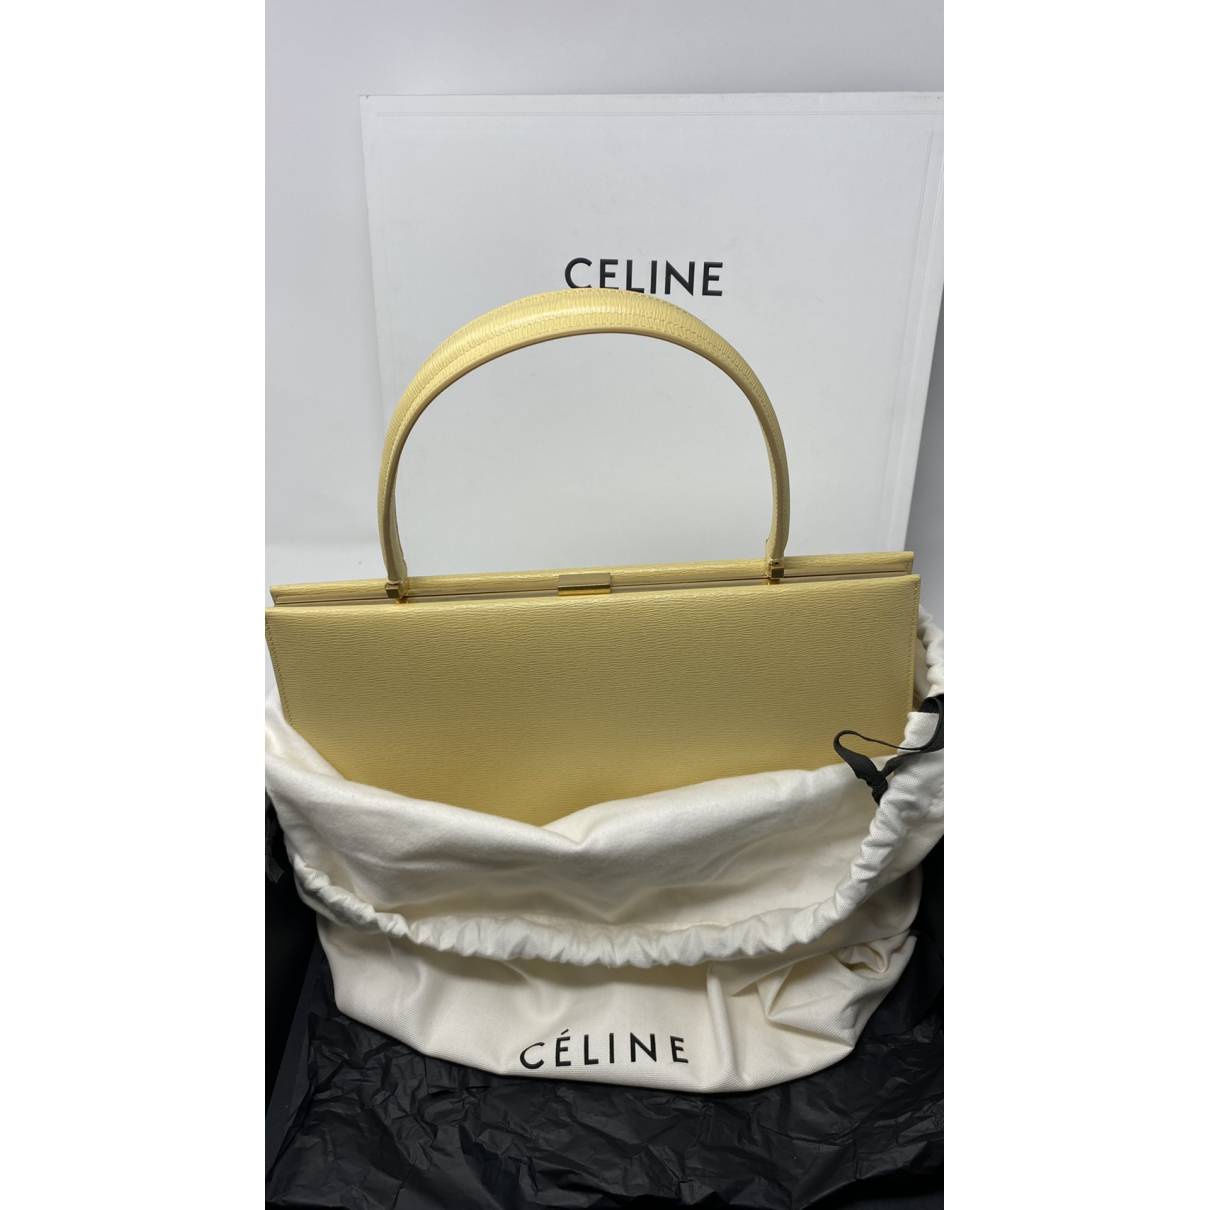 Celine - Authenticated Clasp Handbag - Leather Beige for Women, Never Worn, with Tag